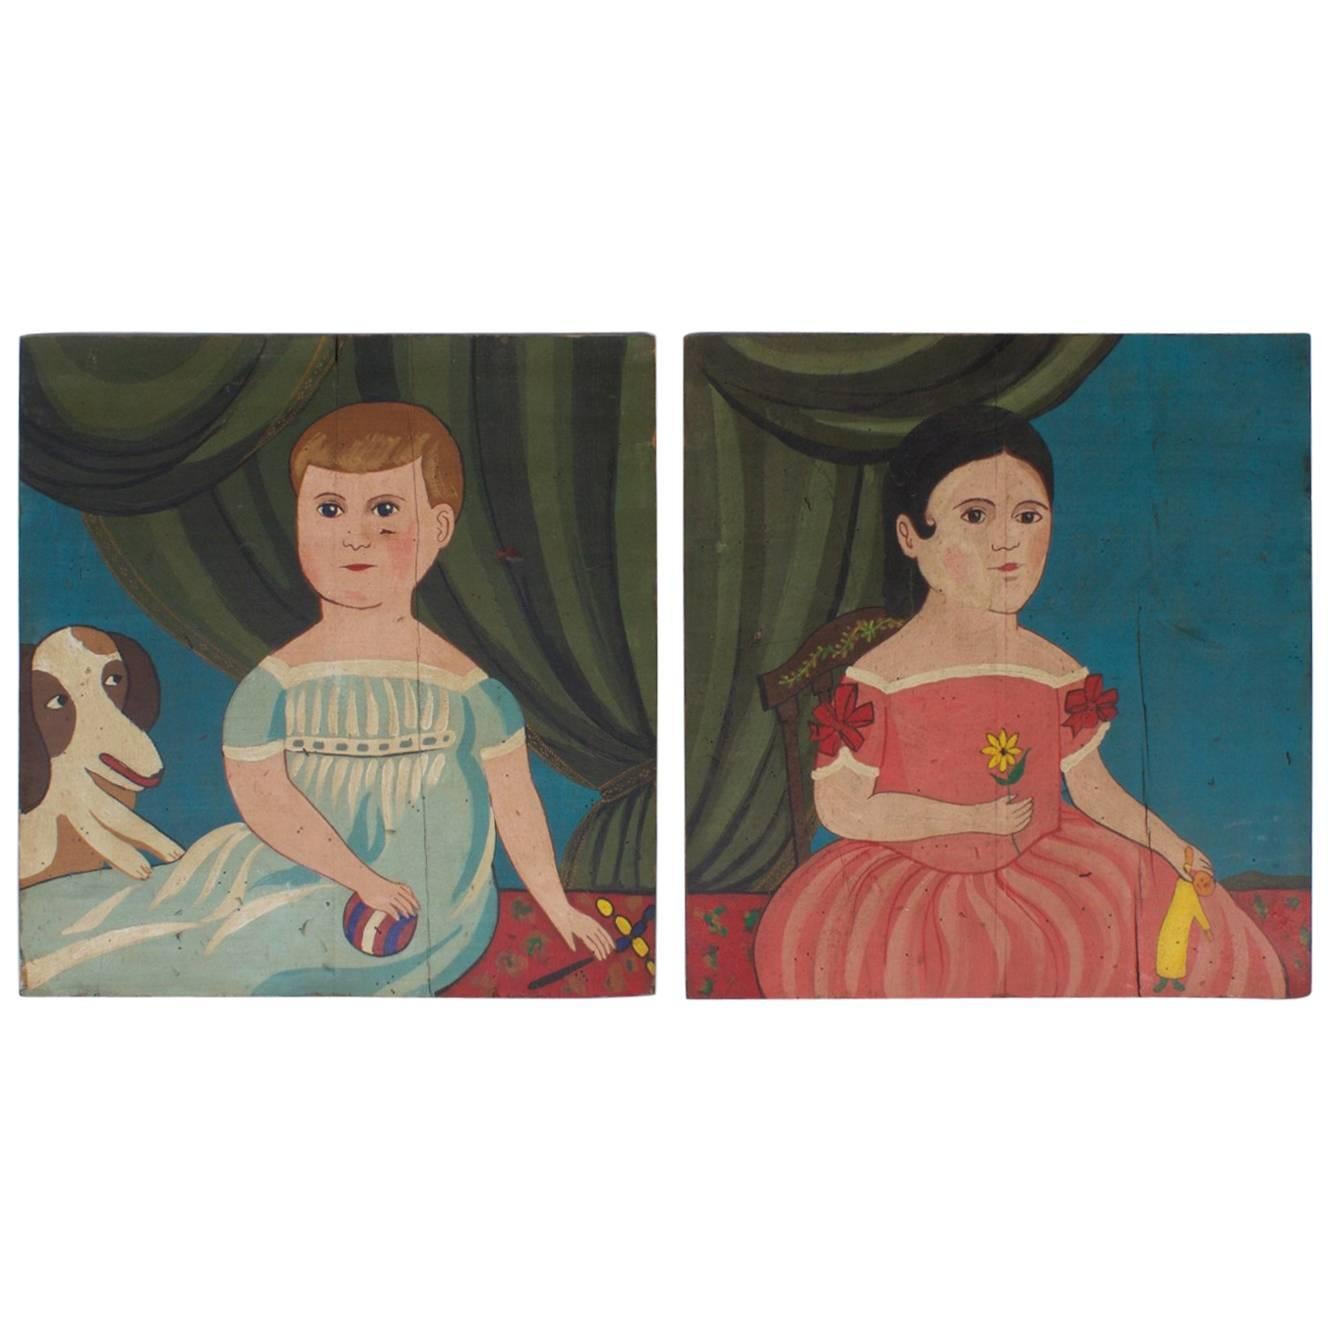 Pair of Primitive Folky Oil Paintings on Board of Children by Karl Mann